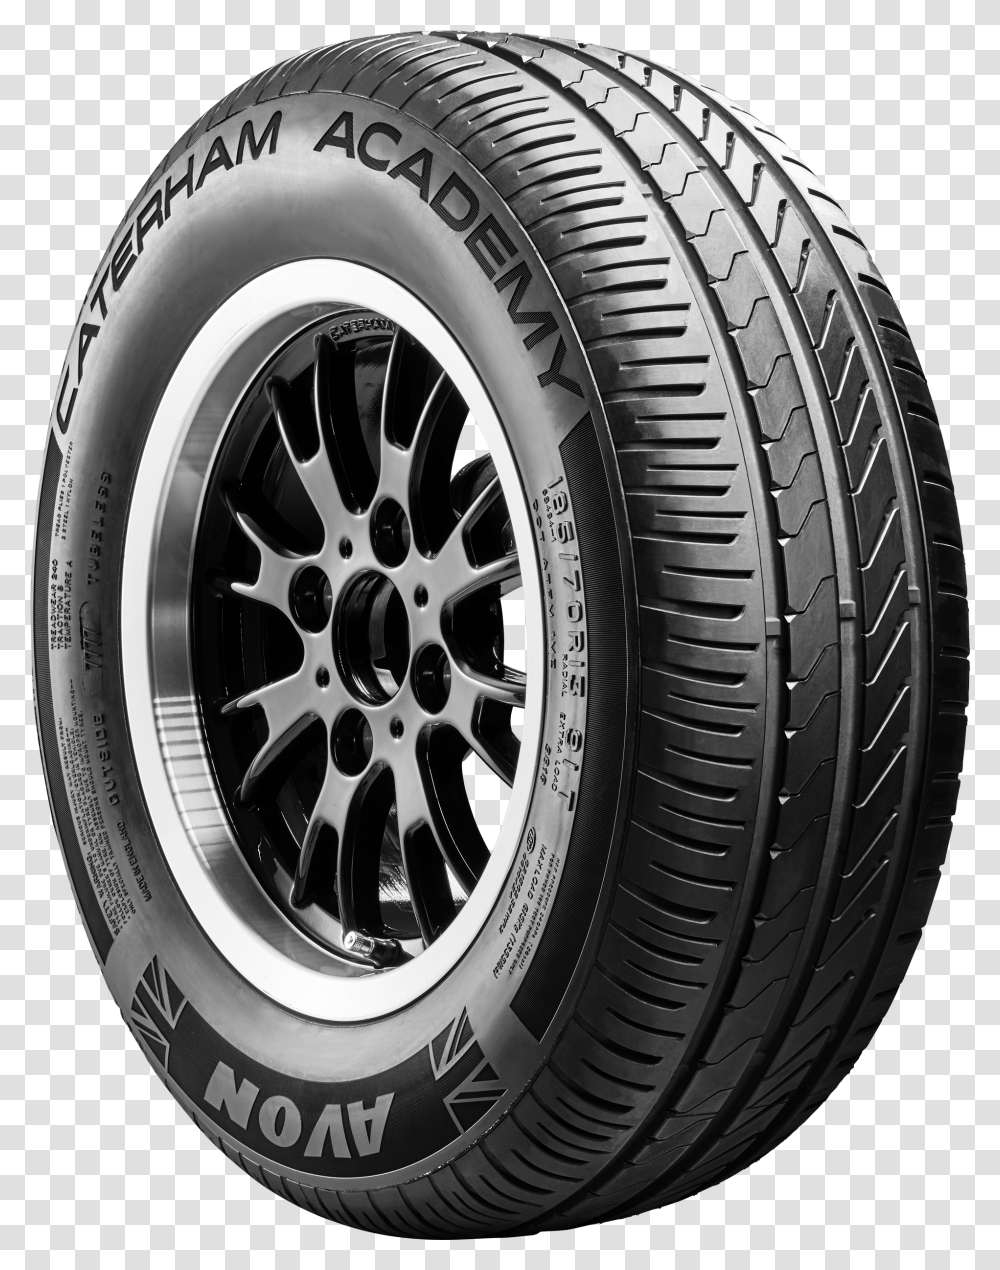 Caterham Cars Synthetic Rubber, Tire, Wheel, Machine, Car Wheel Transparent Png